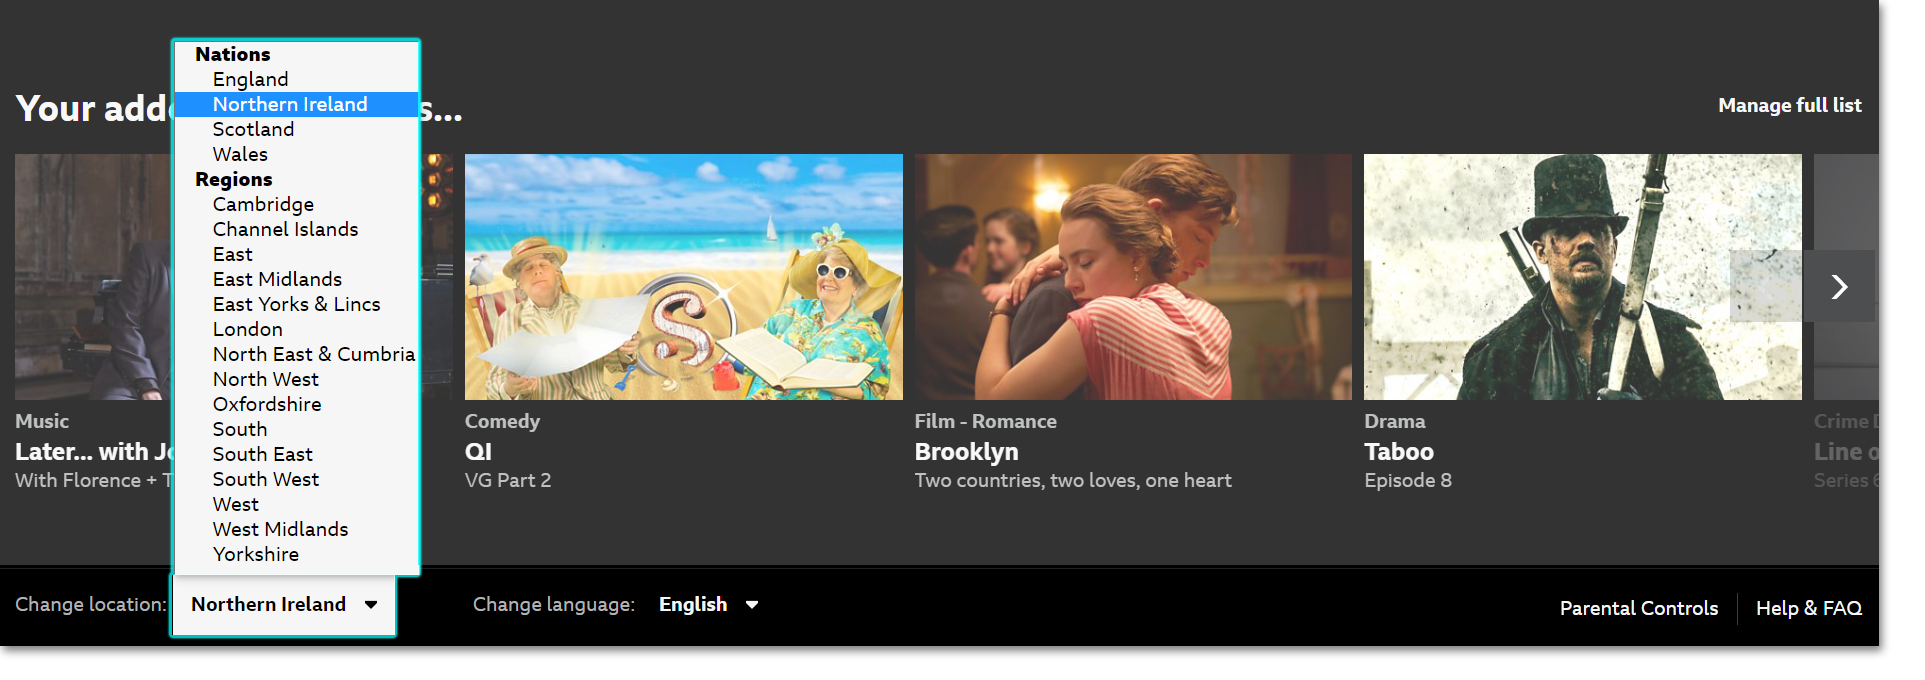 Screenshot of the BBC iPlayer website showing the various location options